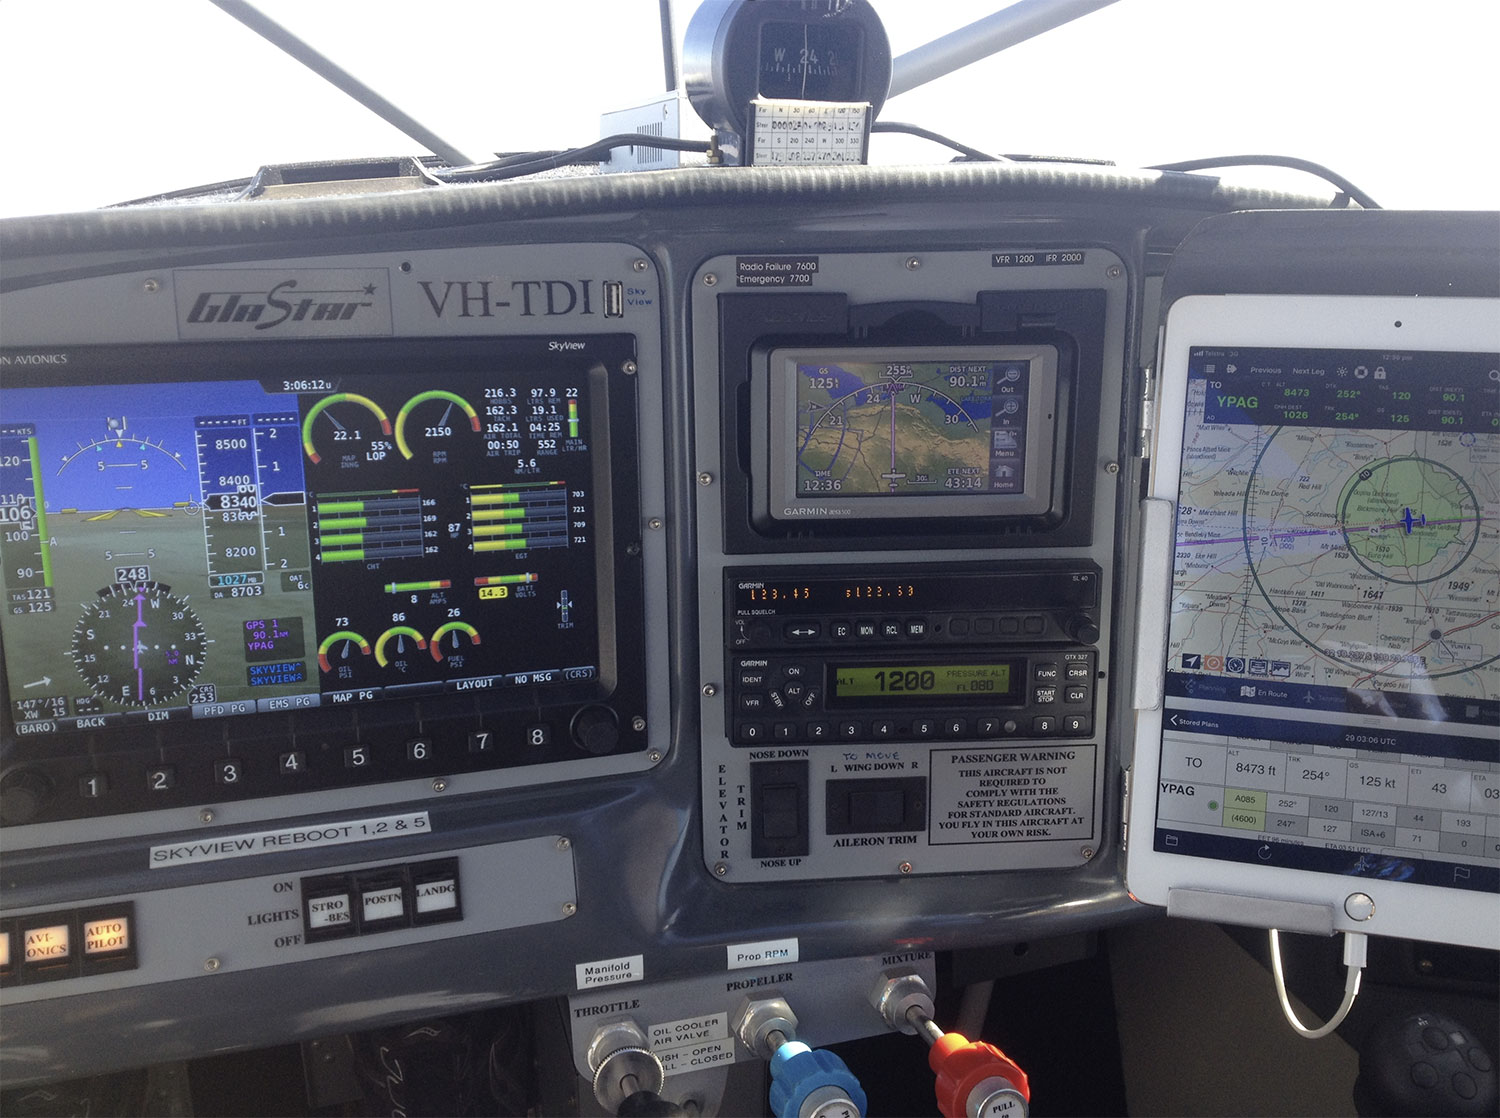 The "office" at 8340 feet tracking to Port Augusta.